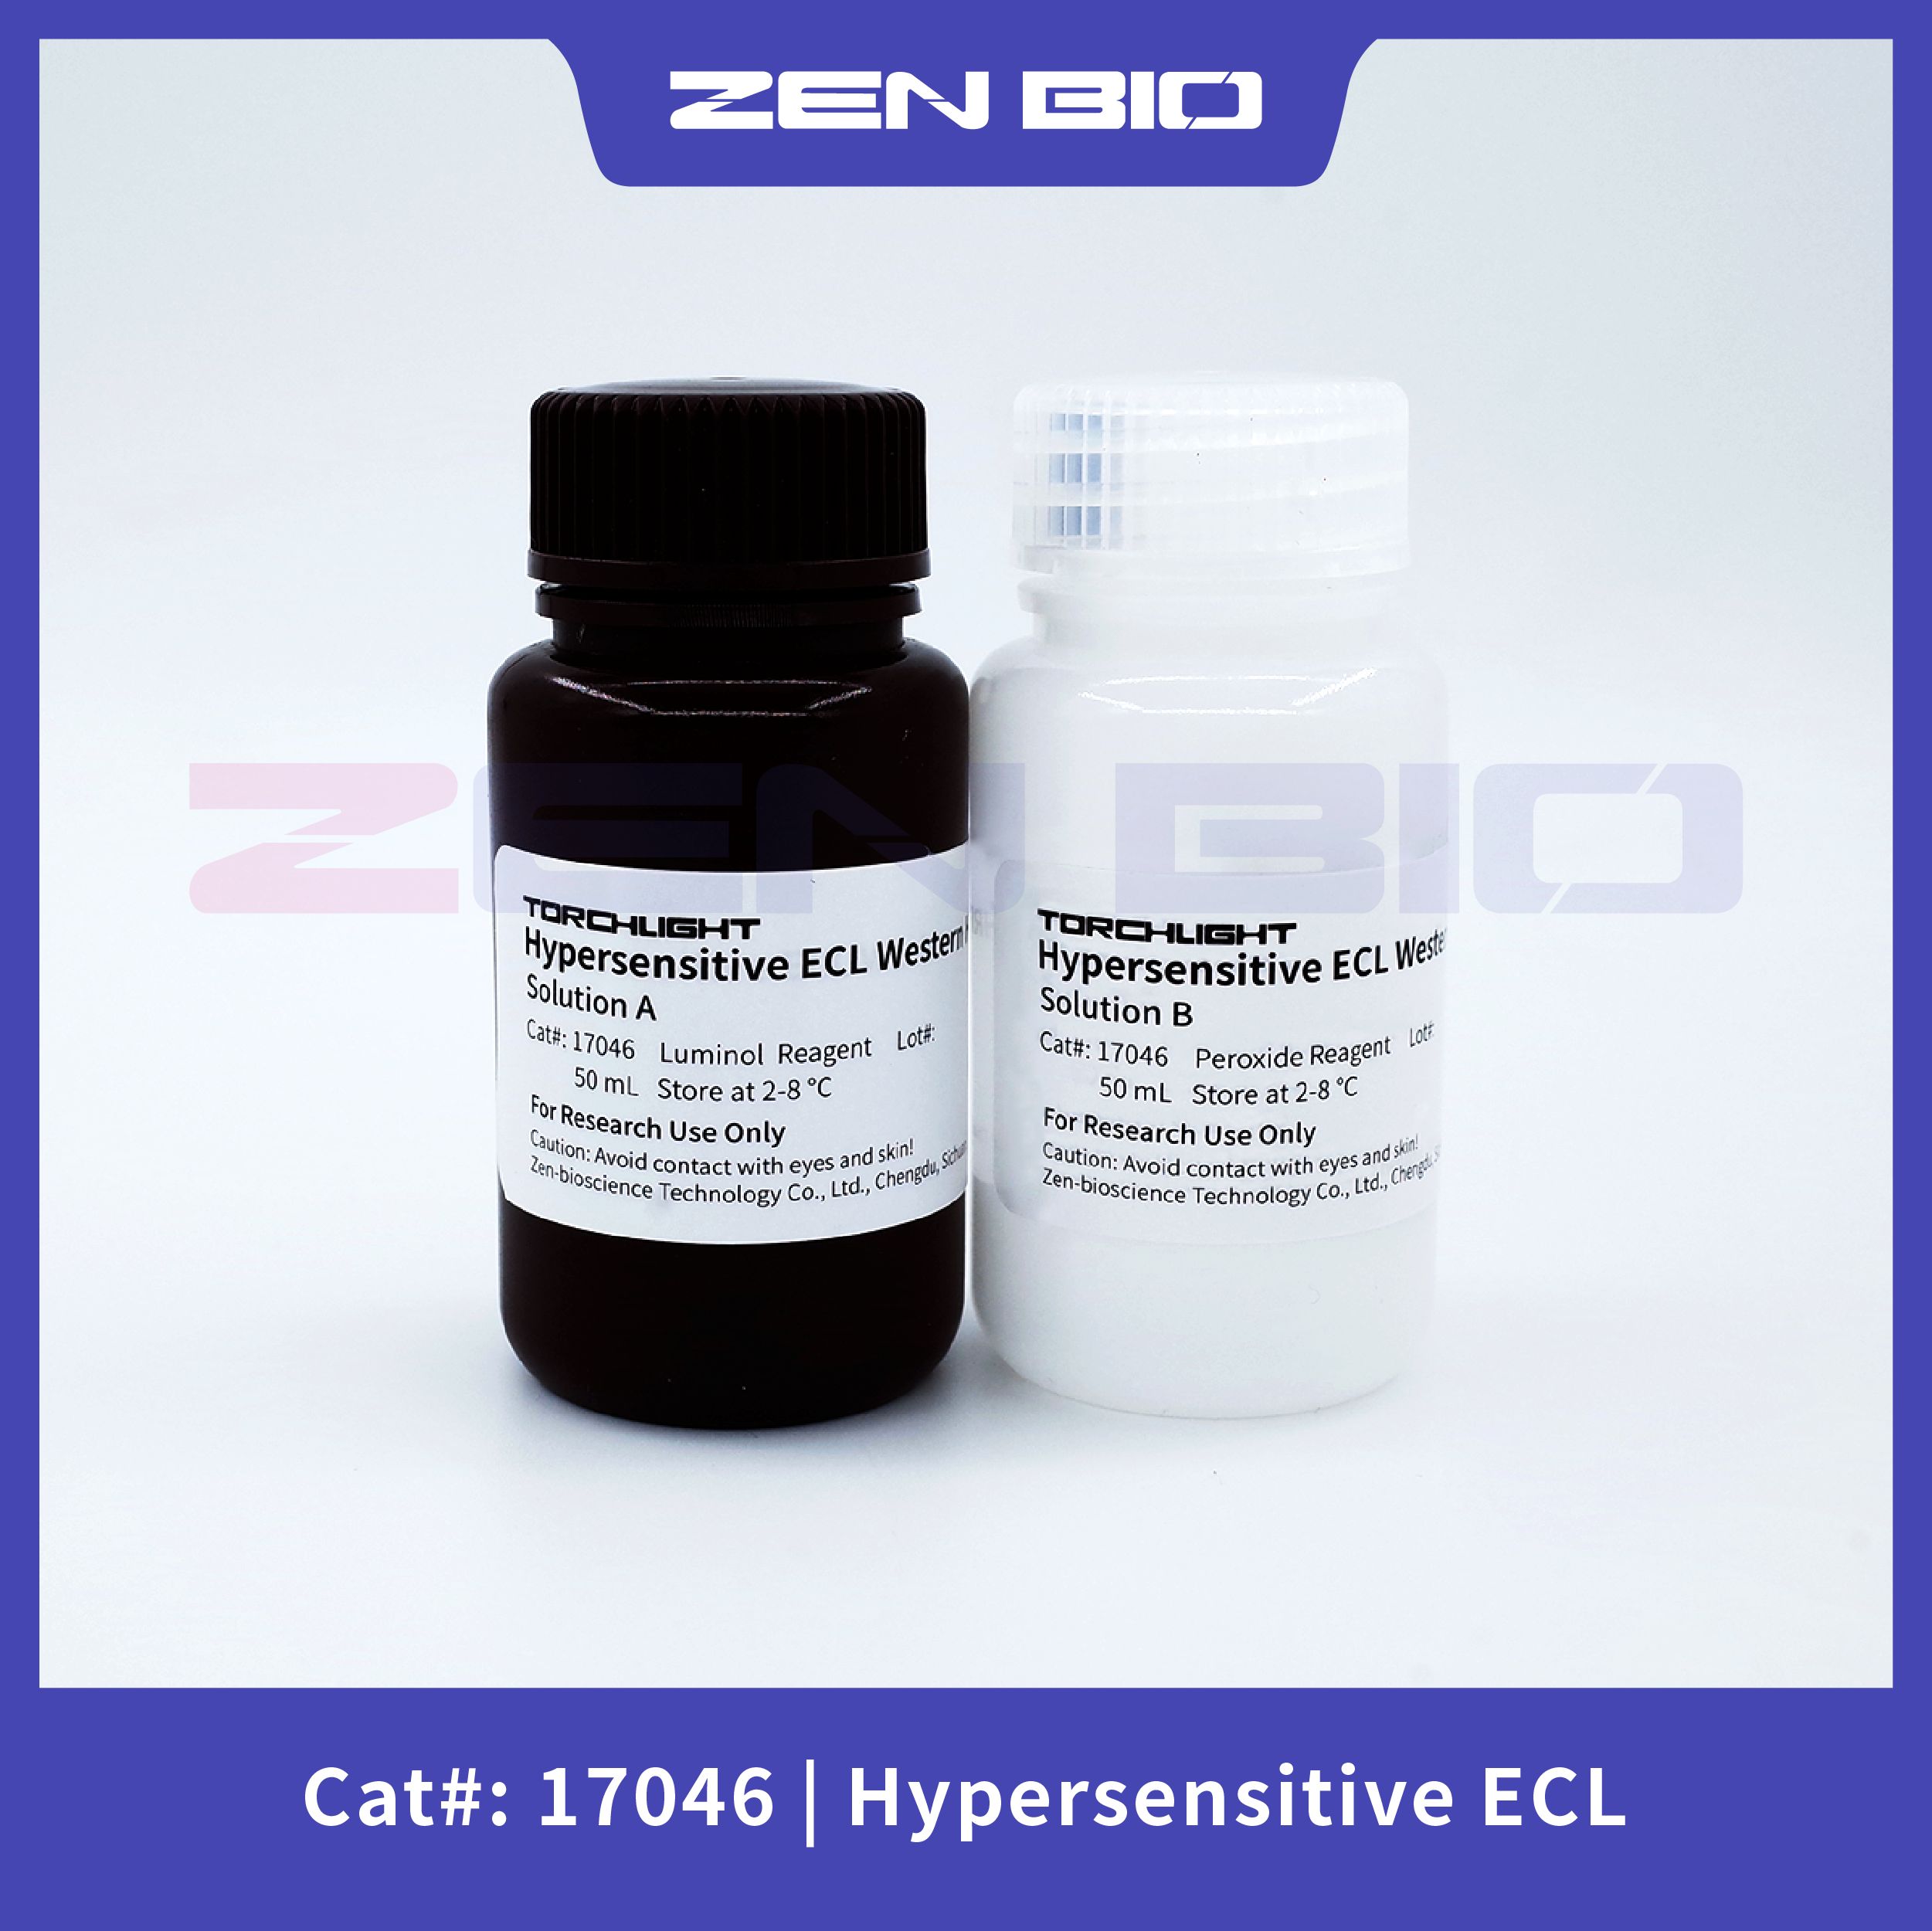 Hypersensitive ECL Western HRP Substrate